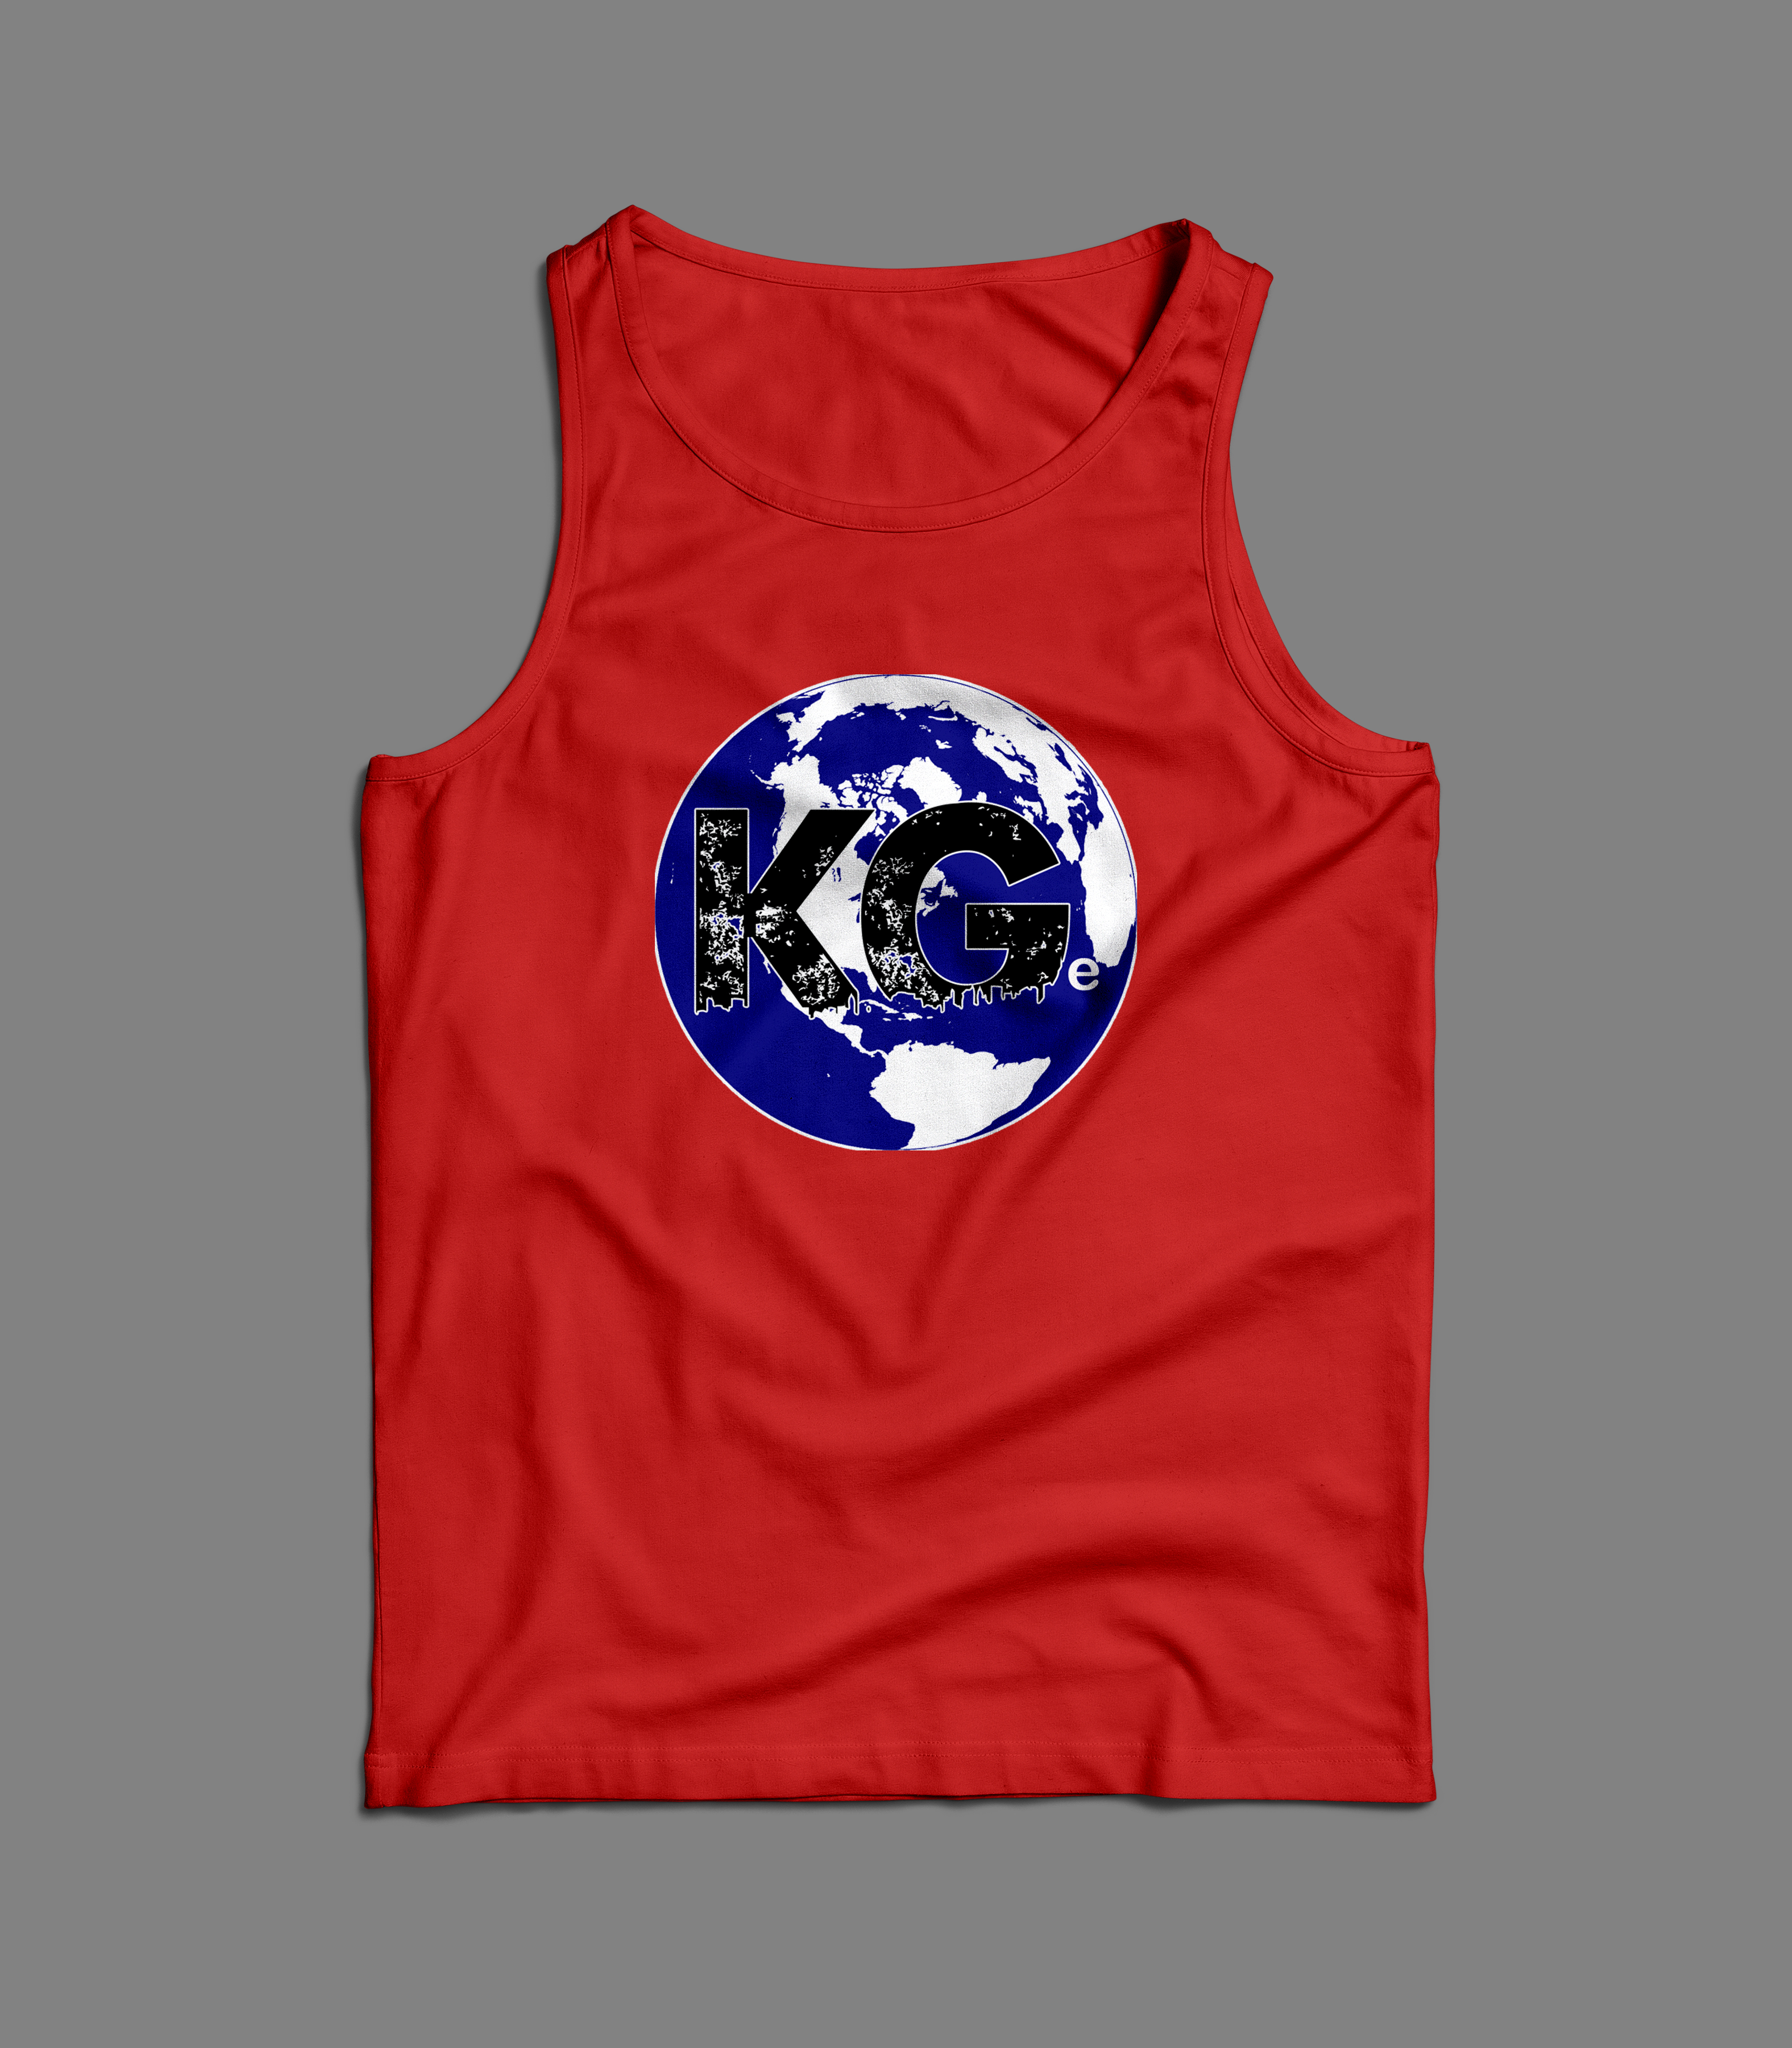 red world tank top